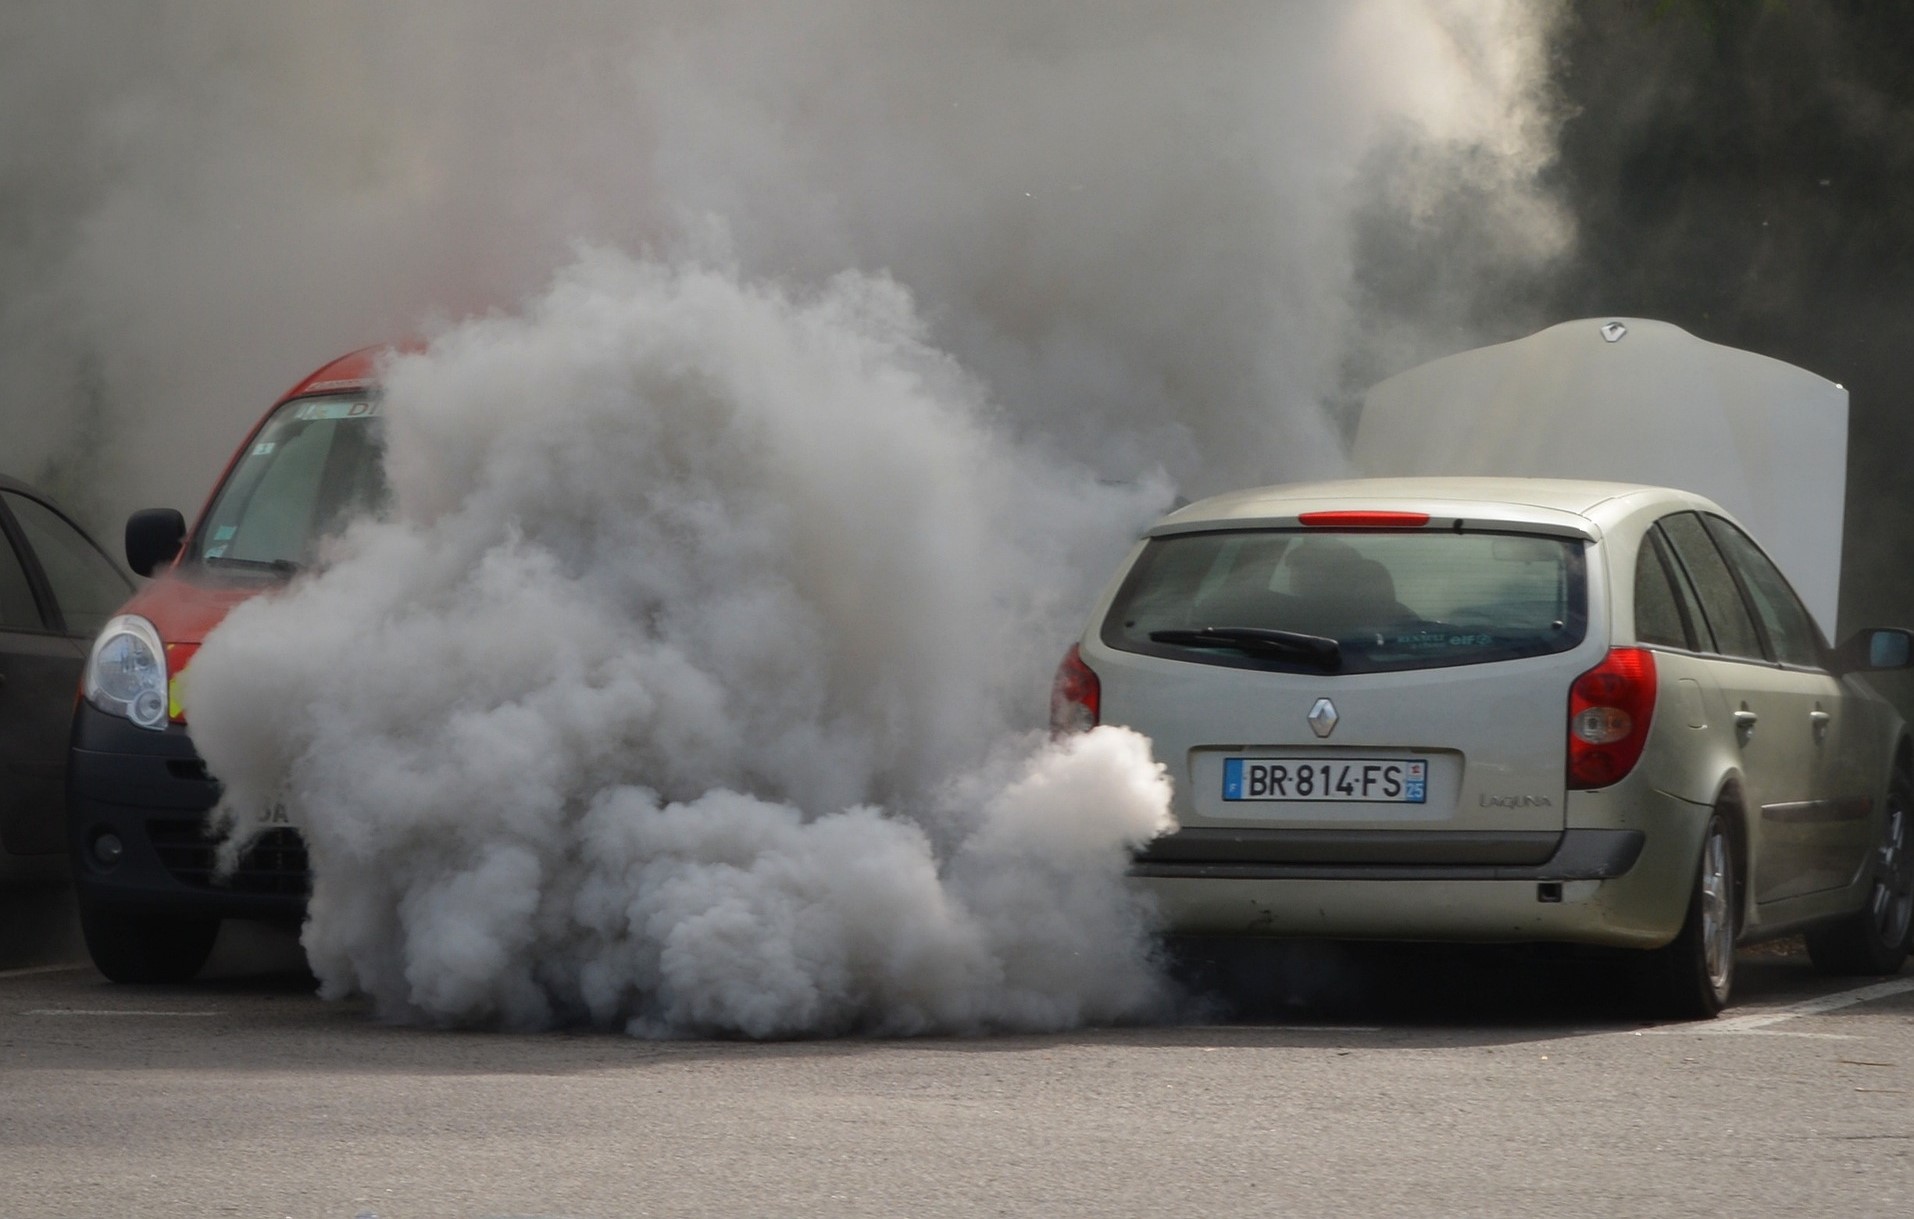 They produced energy from the worst waste.  Car exhaust fumes will no longer be a nuisance